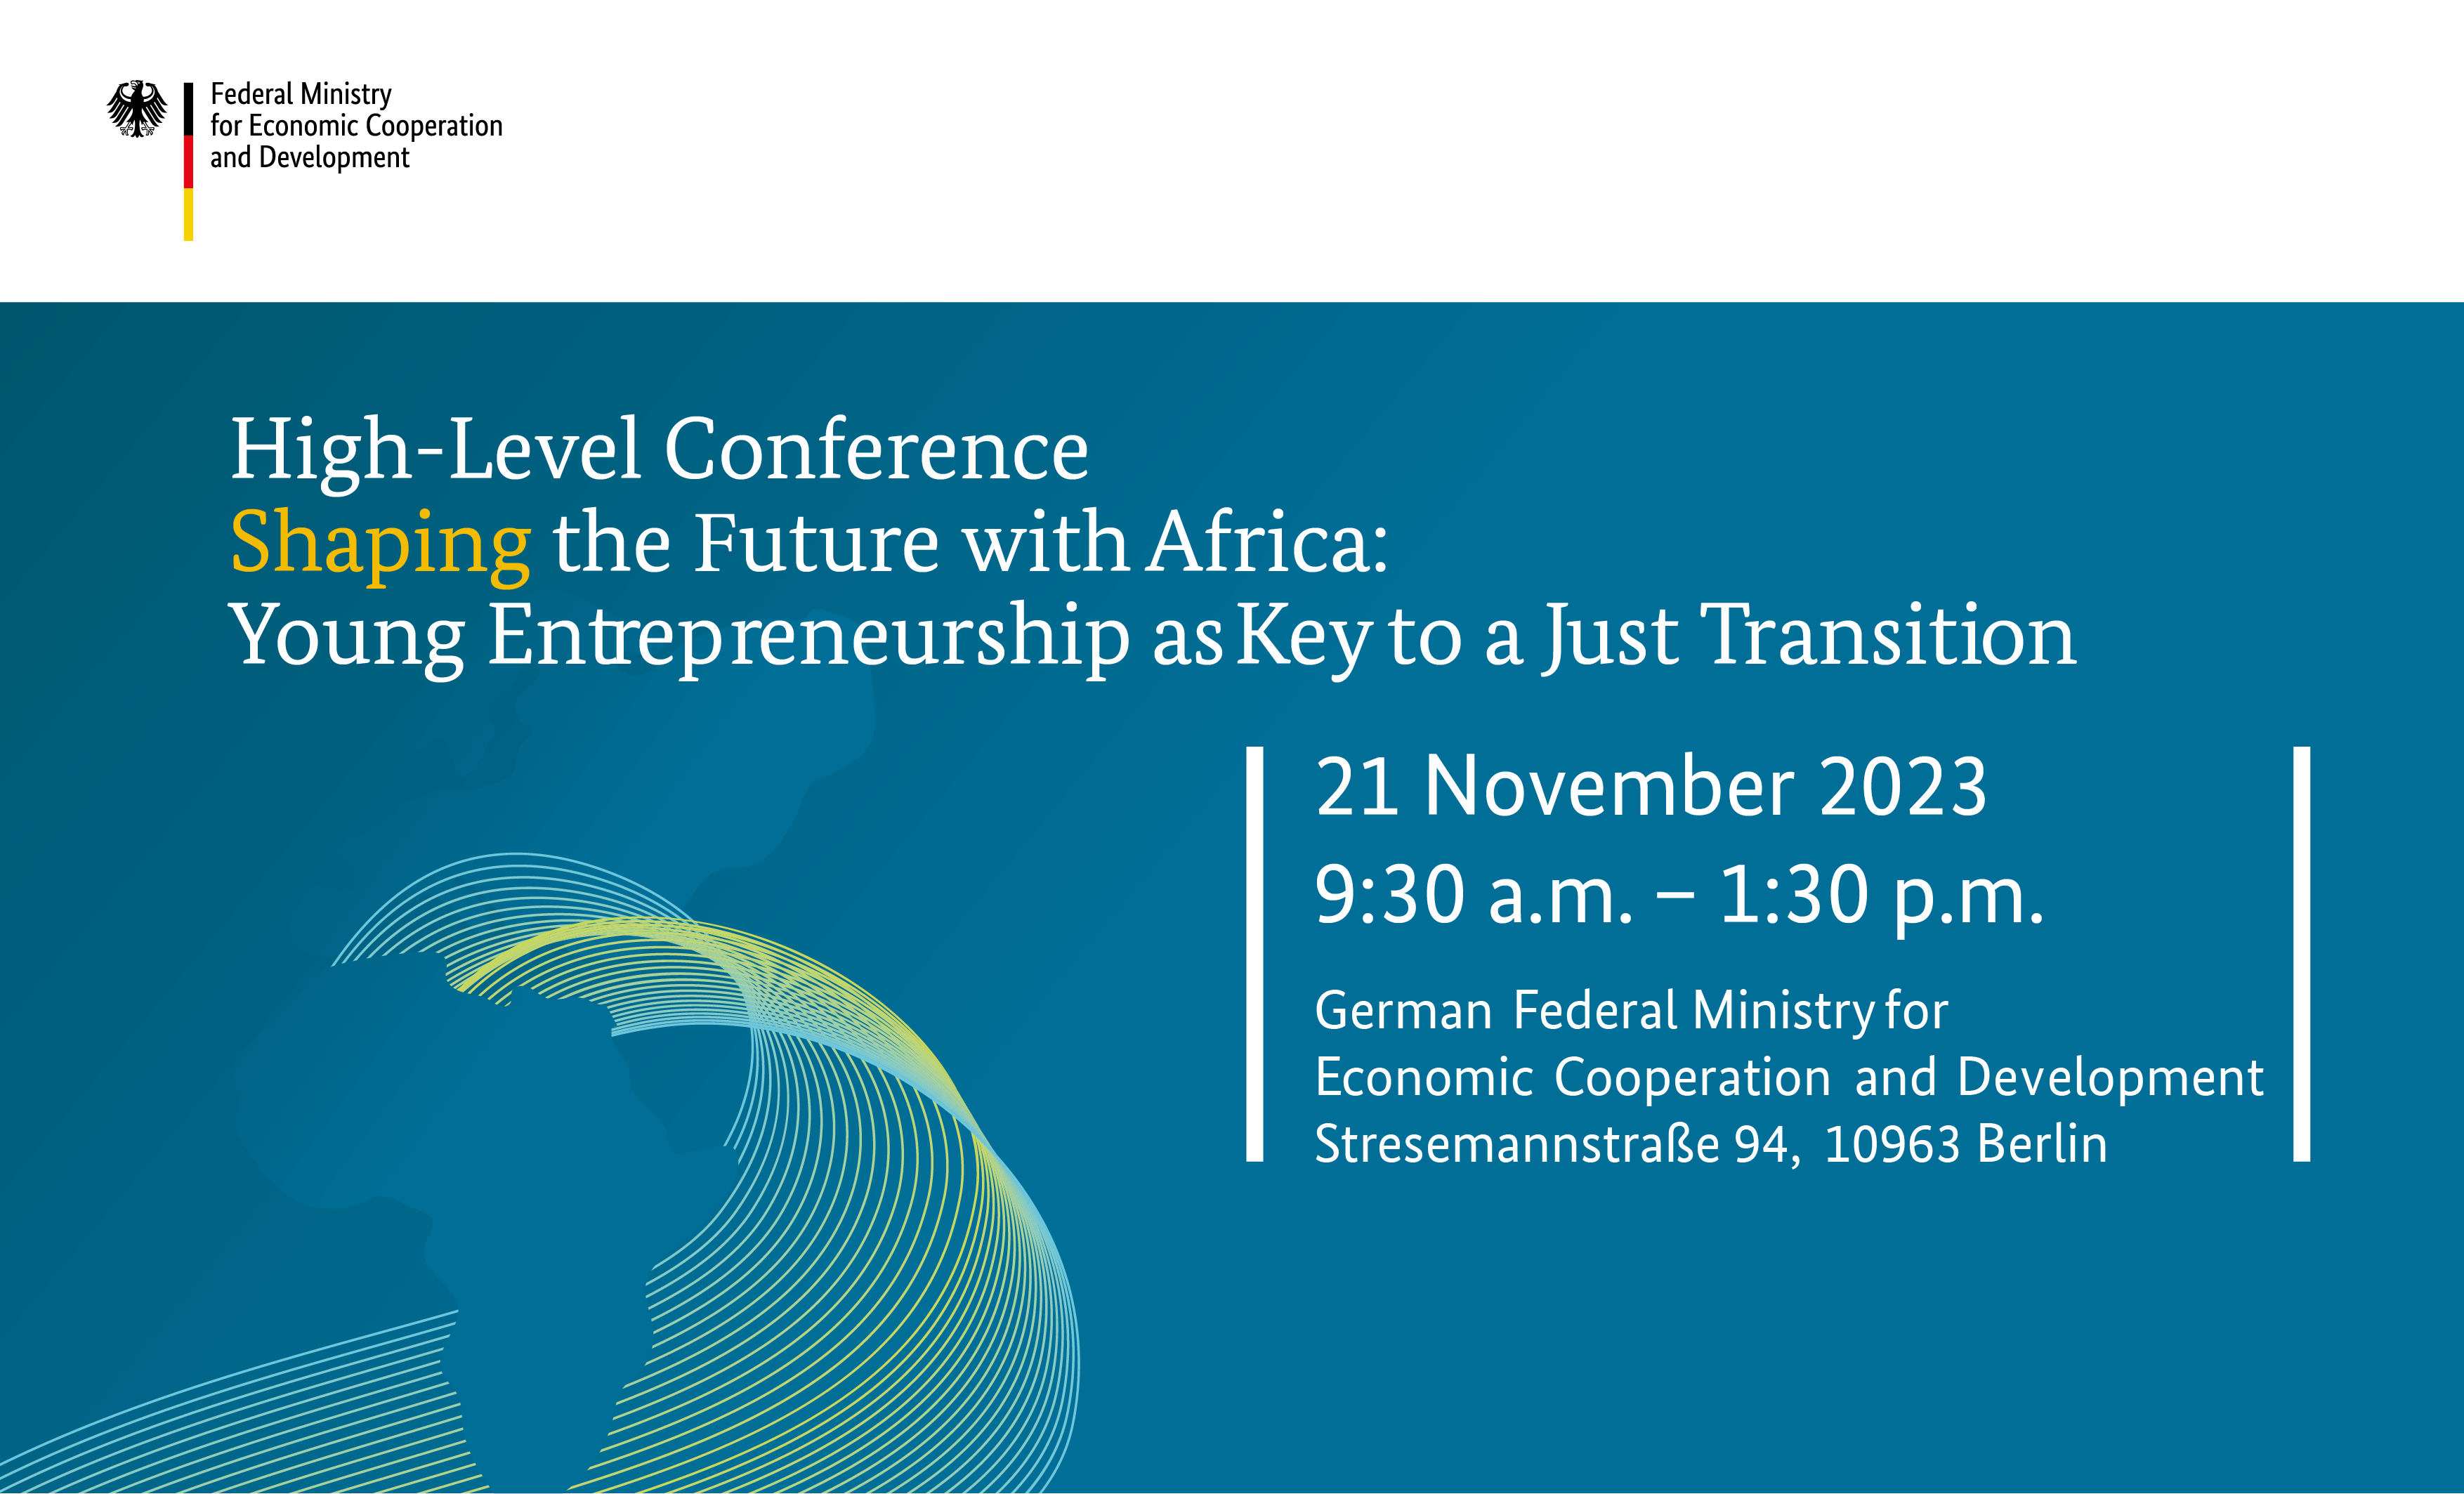 High-Level Conference Shaping the Future with Africa: Young Entrepreneurship as Key to a Just Transition